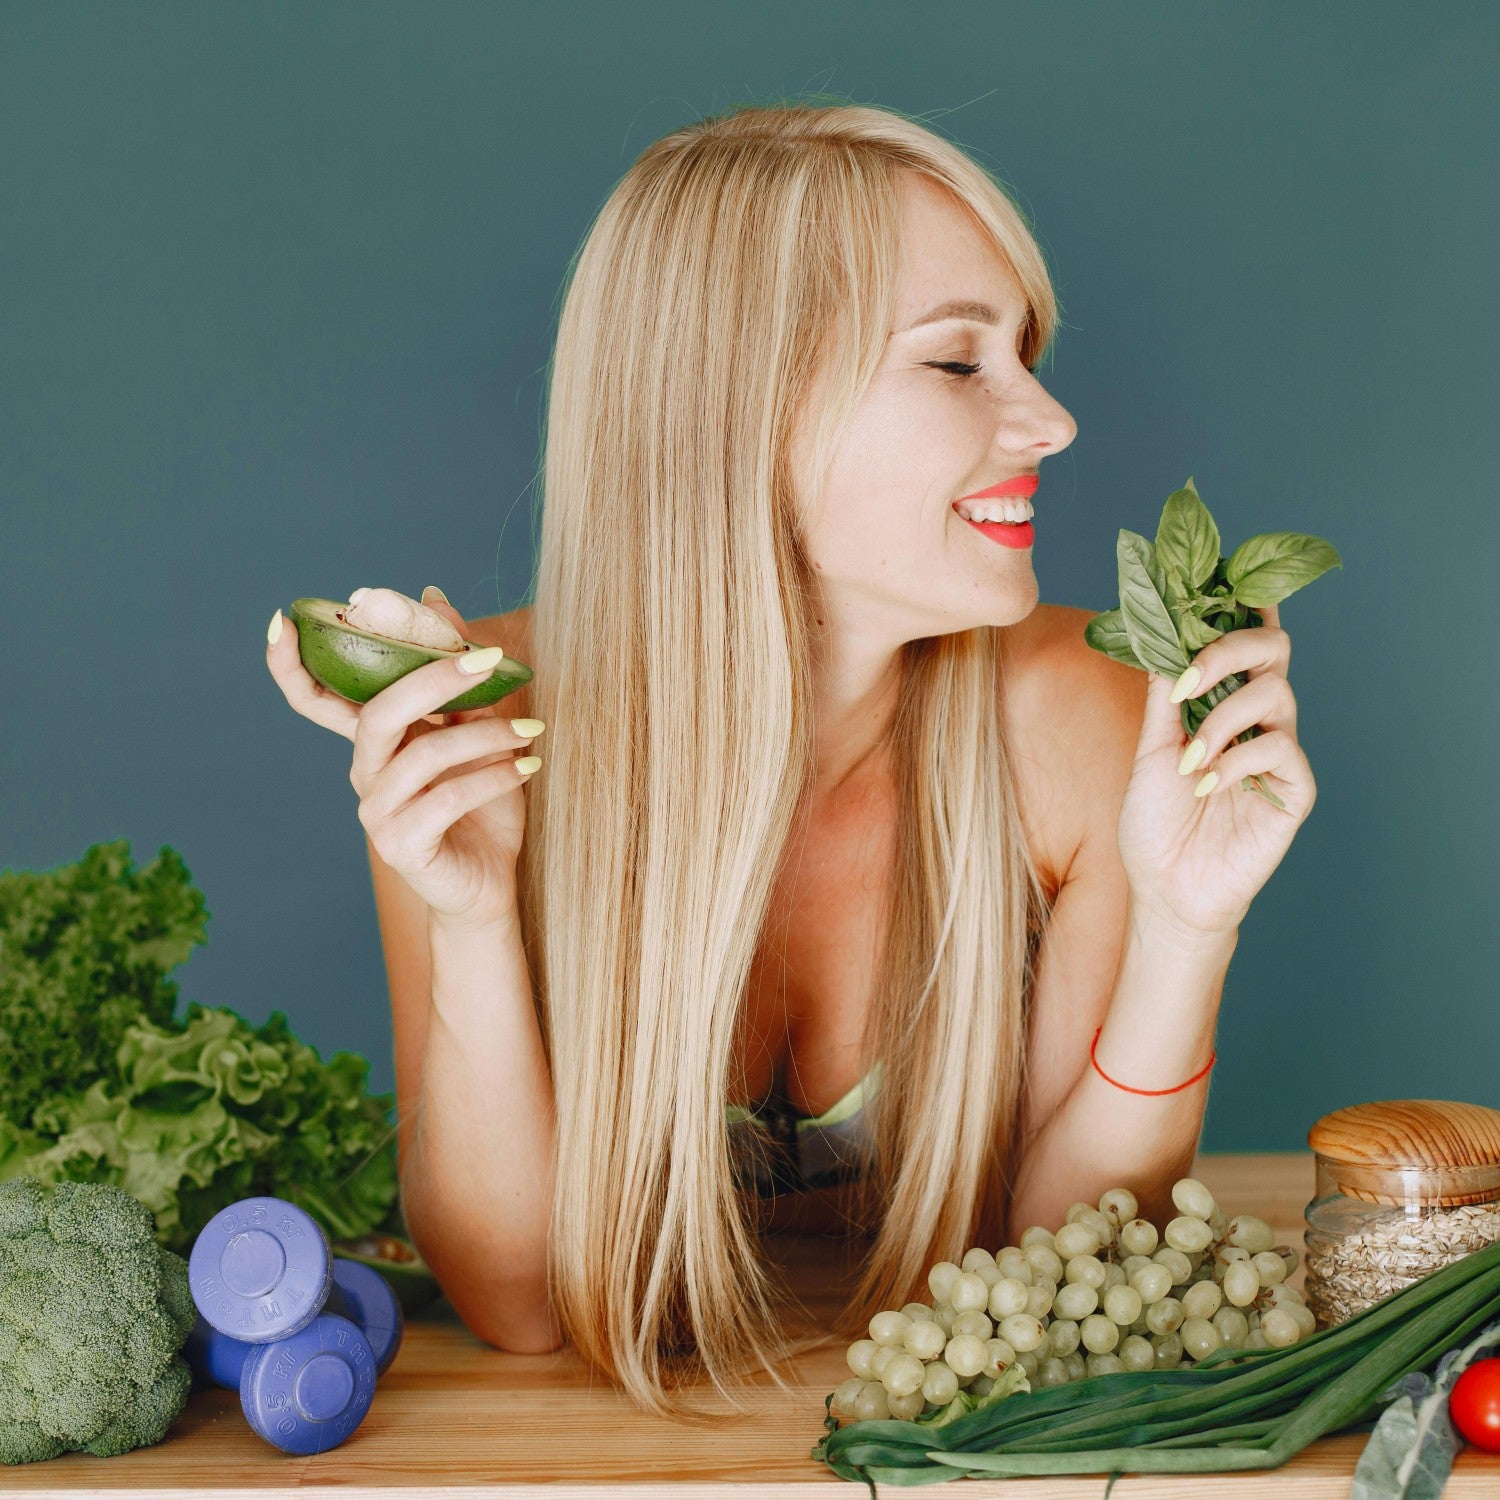 what are the benefits of eating vegetables for fitness